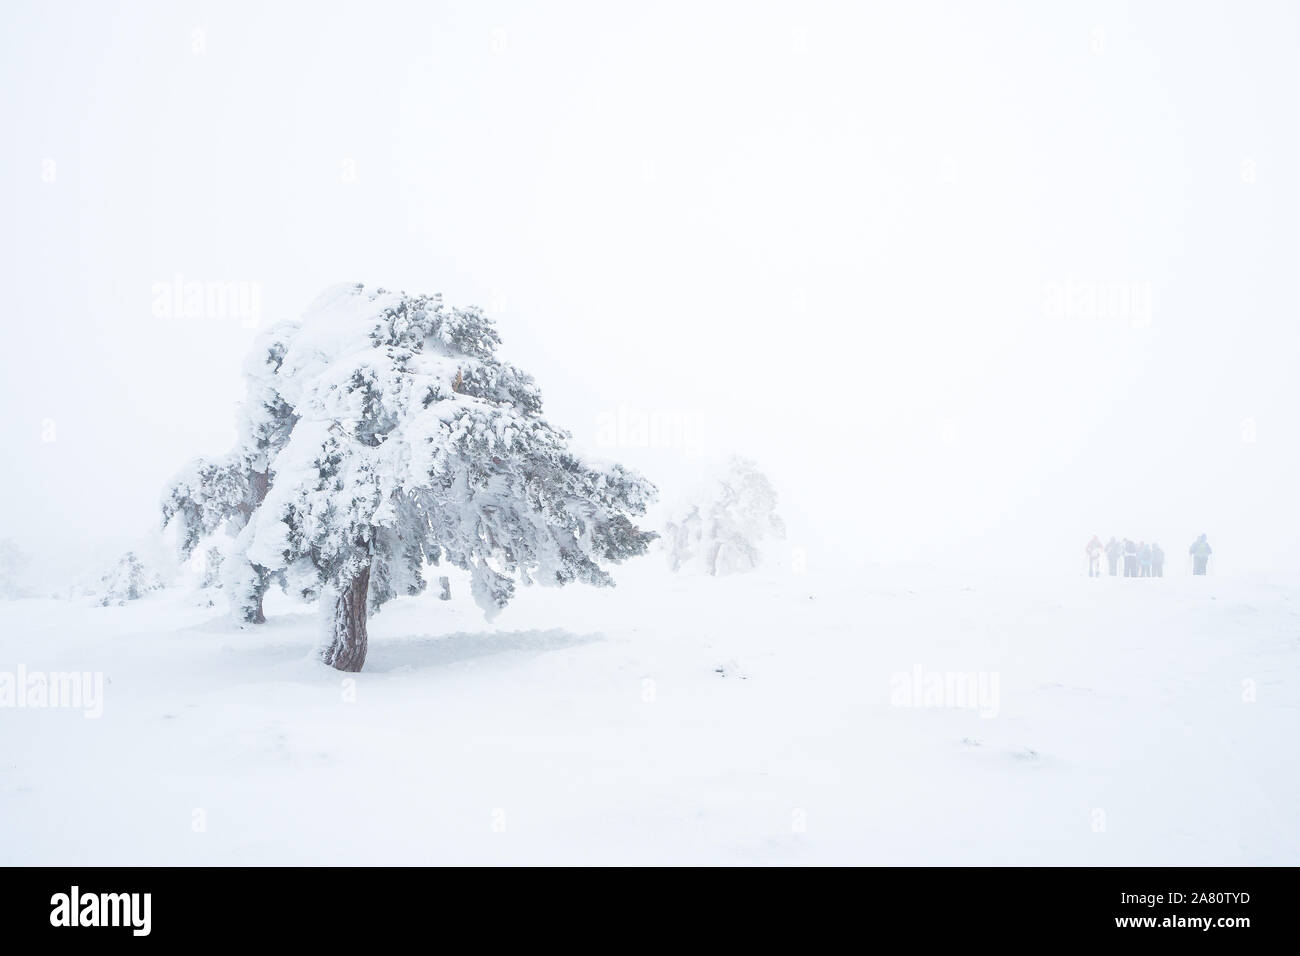 Snowy landscape with a tree and a group of people. Heavy snowfall at Guadarrama, Madrid, Spain. Stock Photo